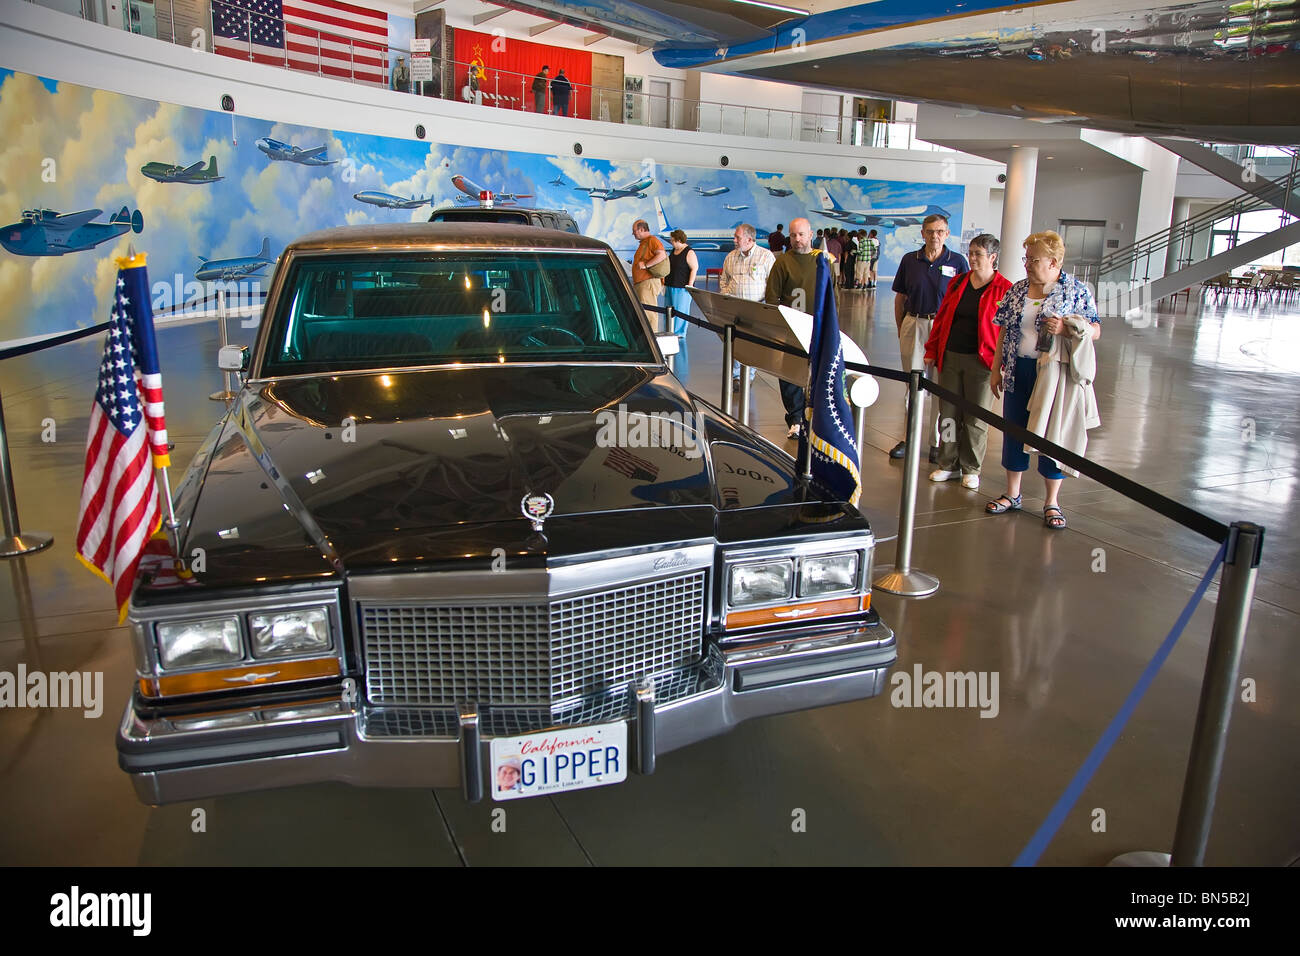 Presidential limousine exhibit at the The Ronald Reagan Presidential Library and Museum in Simi Valley California Stock Photo